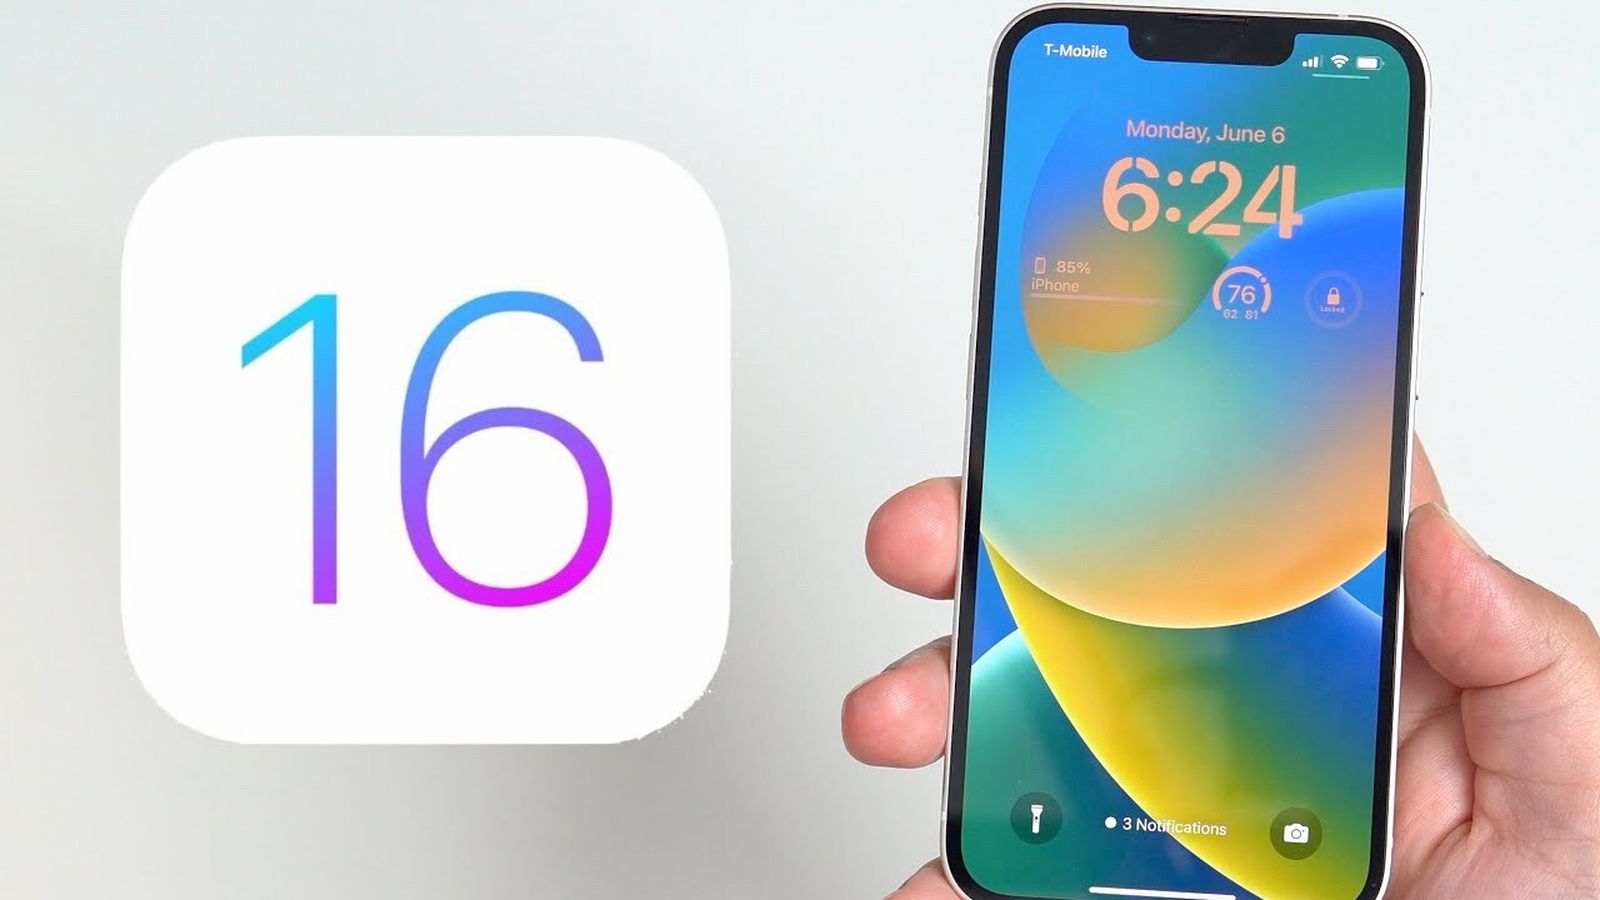 Video: Here's a Look at All the New iOS 16 Features - macrumors.com